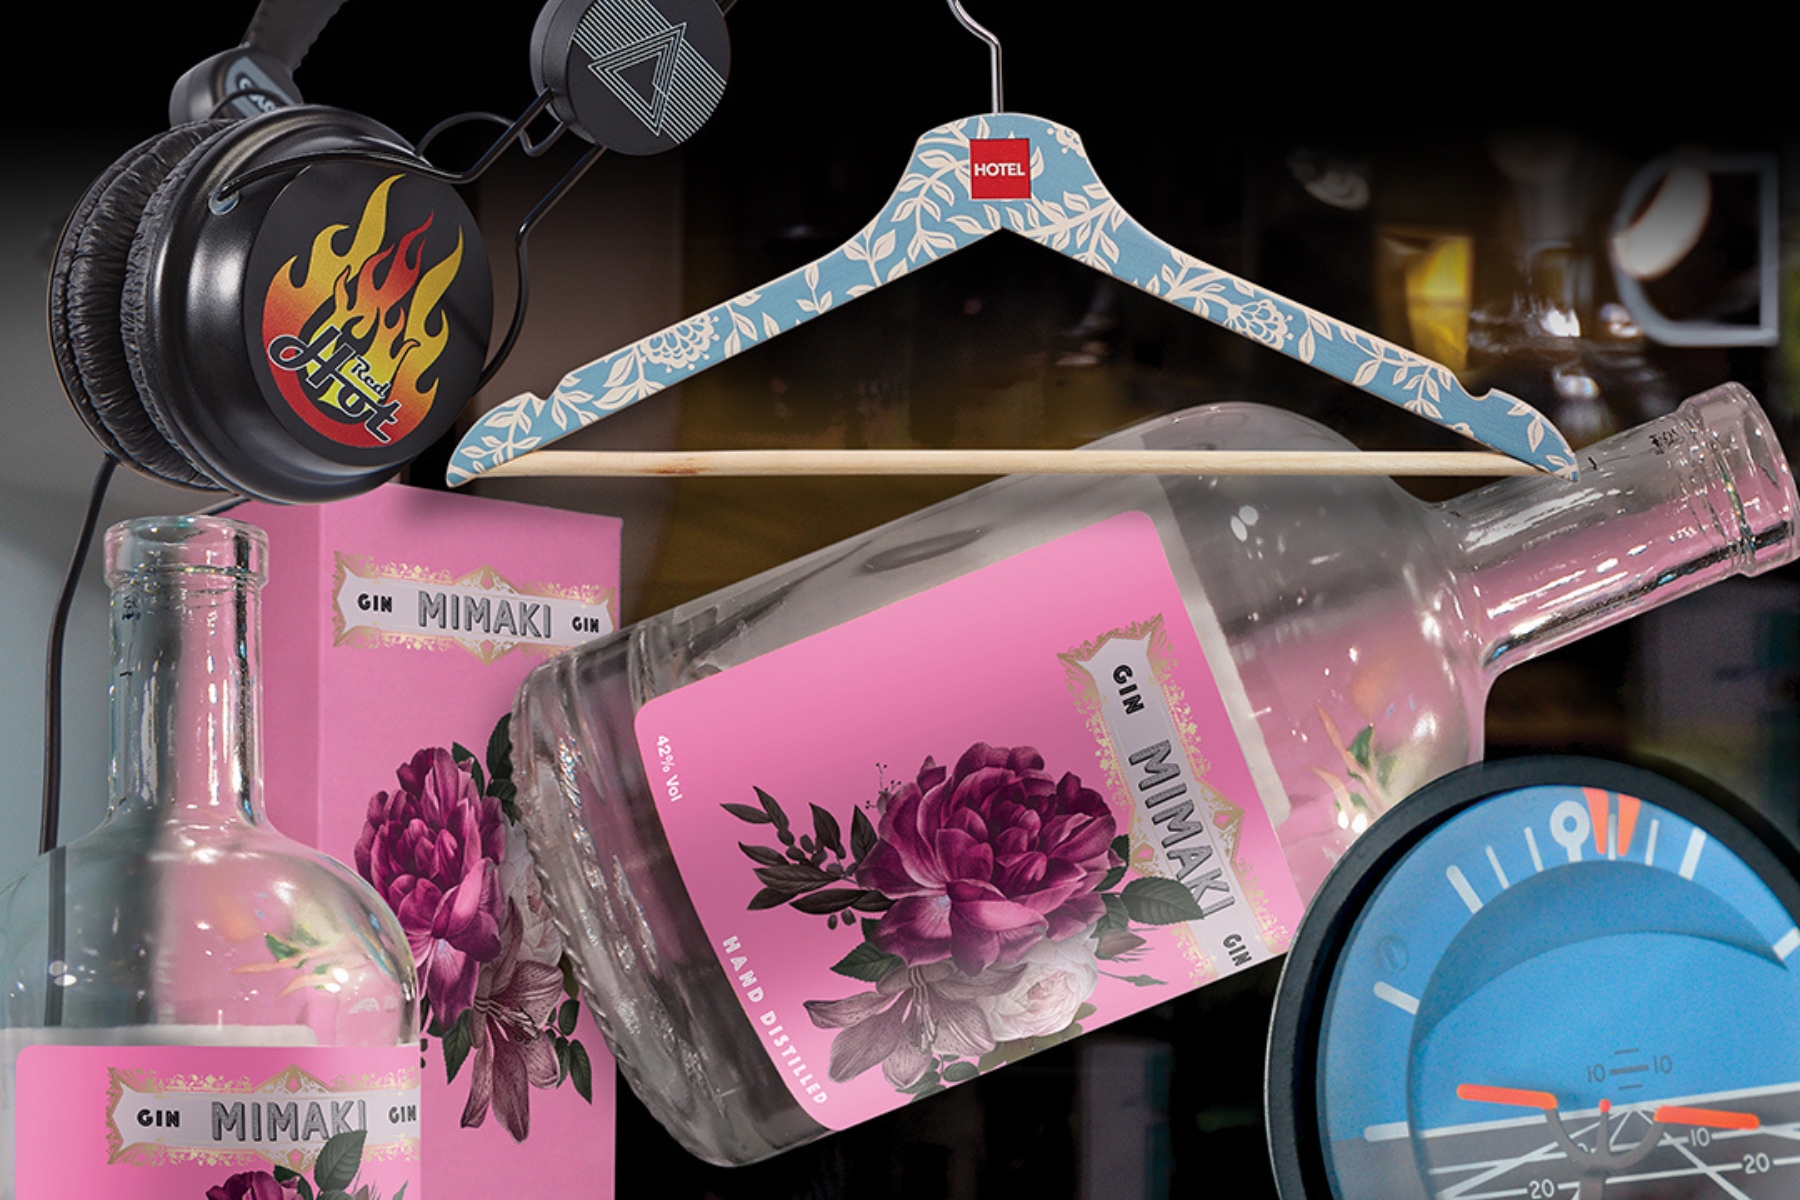 A printed wooden coat hanger, gine bottle, package, headphones and dial - all produced with Mimaki UV printing technology